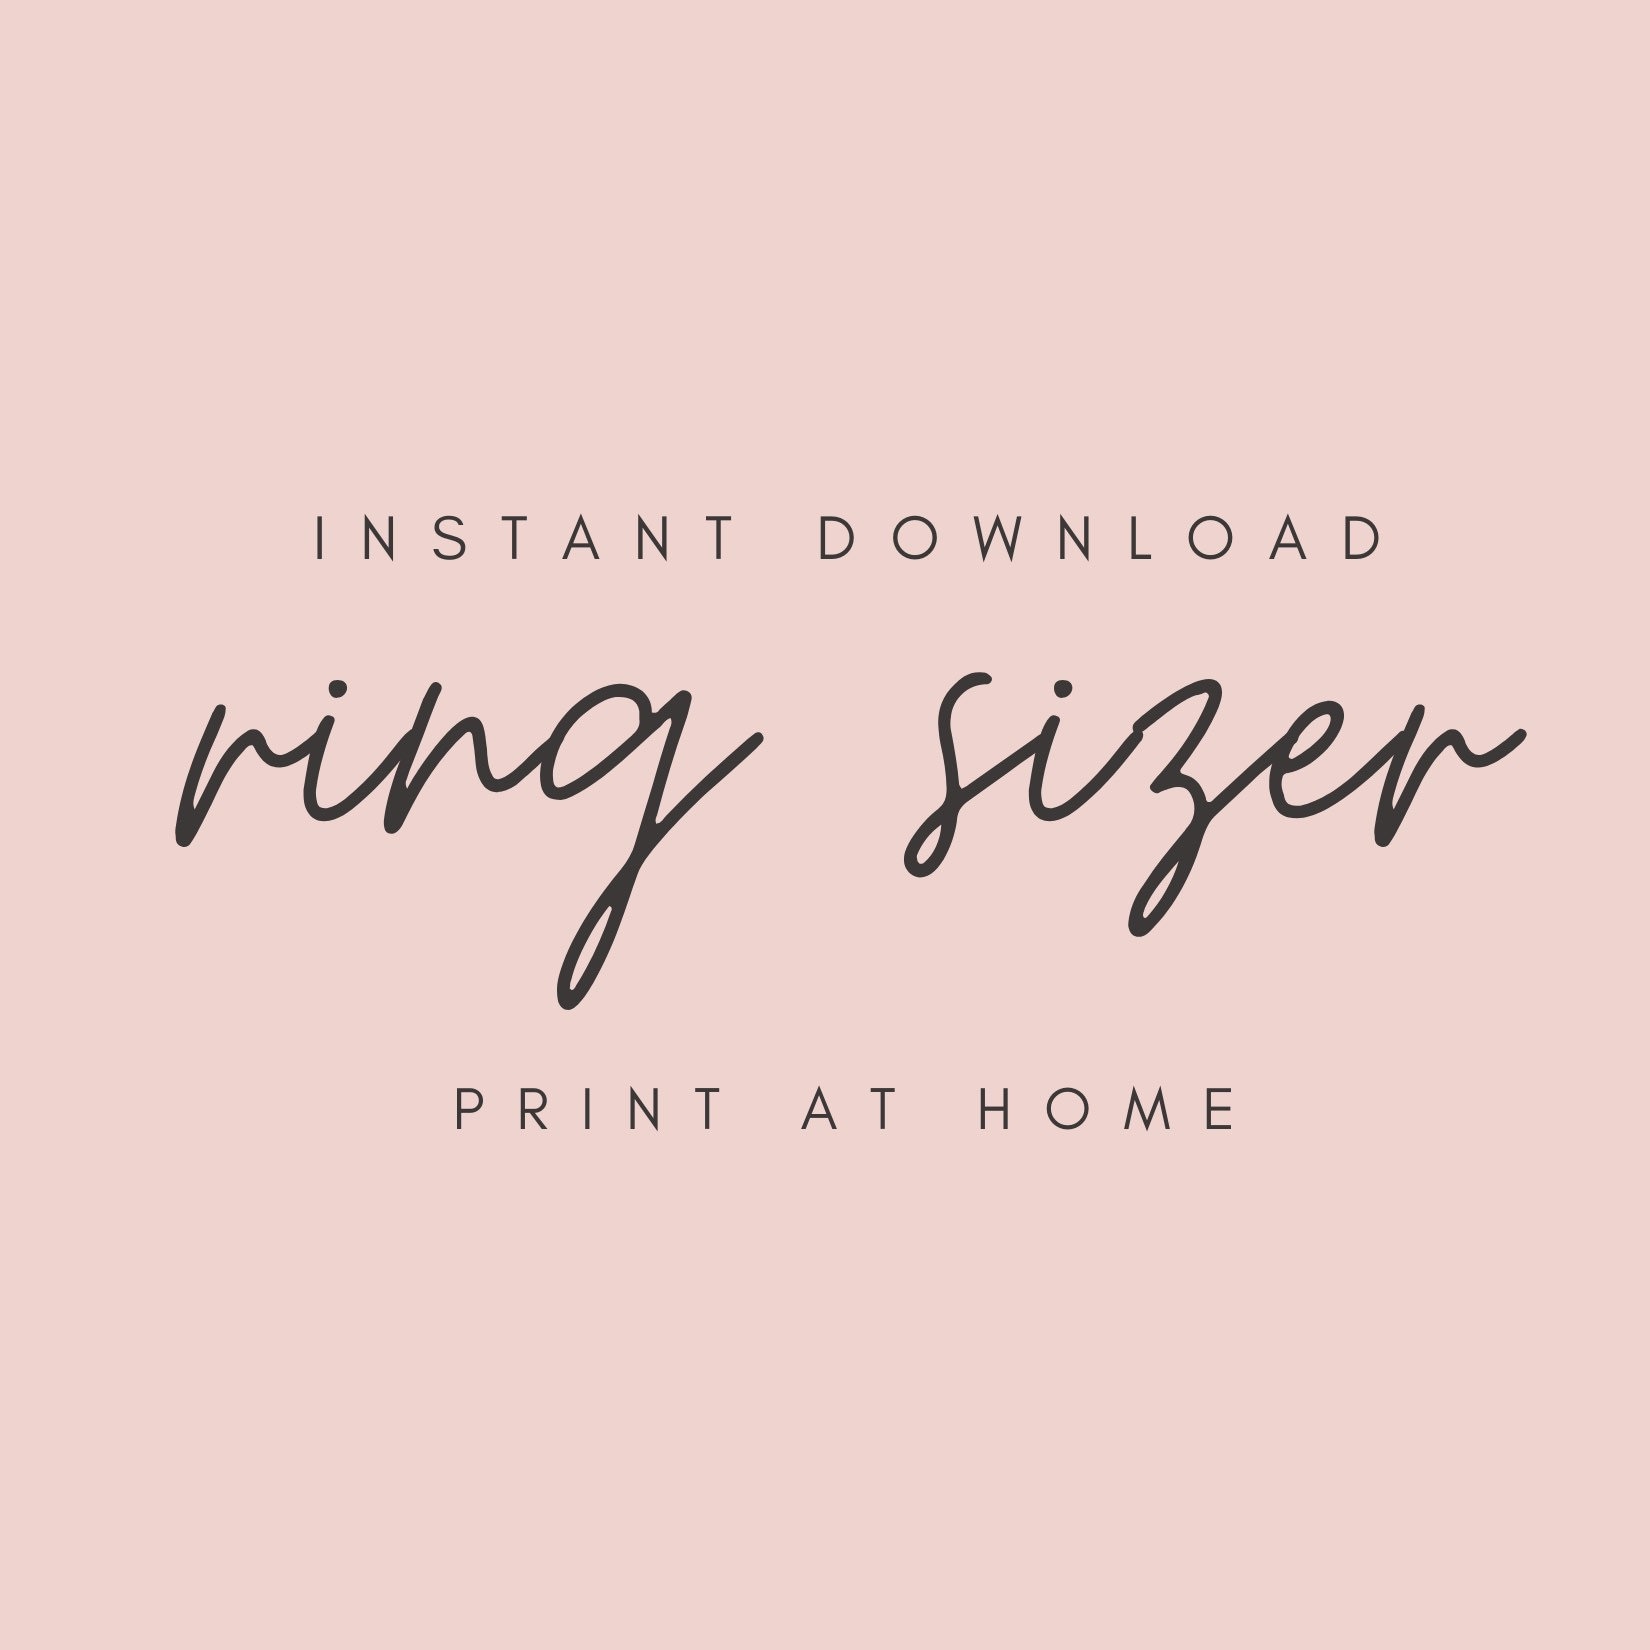 Free Printable Ring Sizer Find Your Ring Size Paper Ring Sizer at